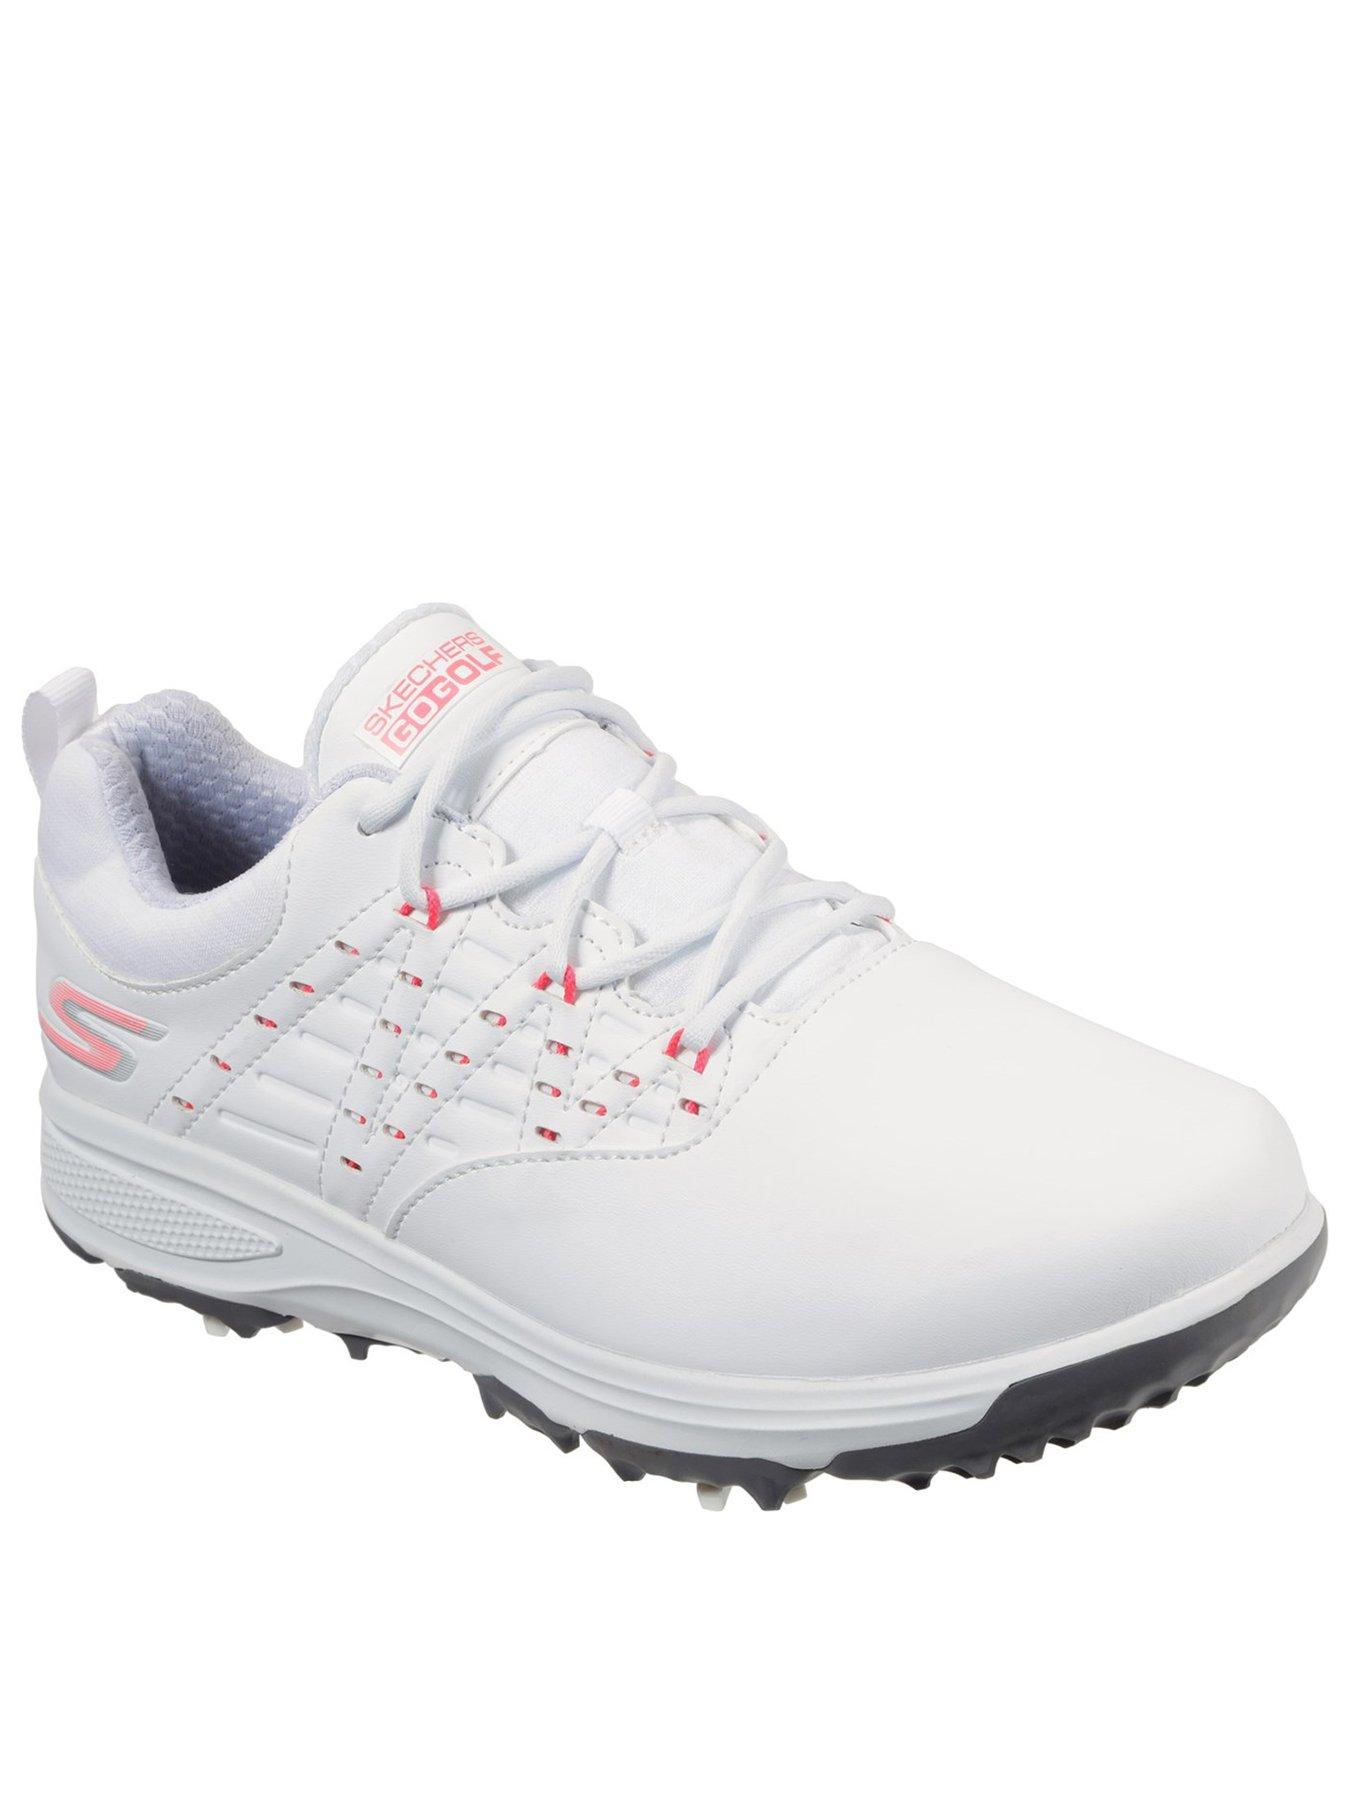 best spiked golf shoes 218